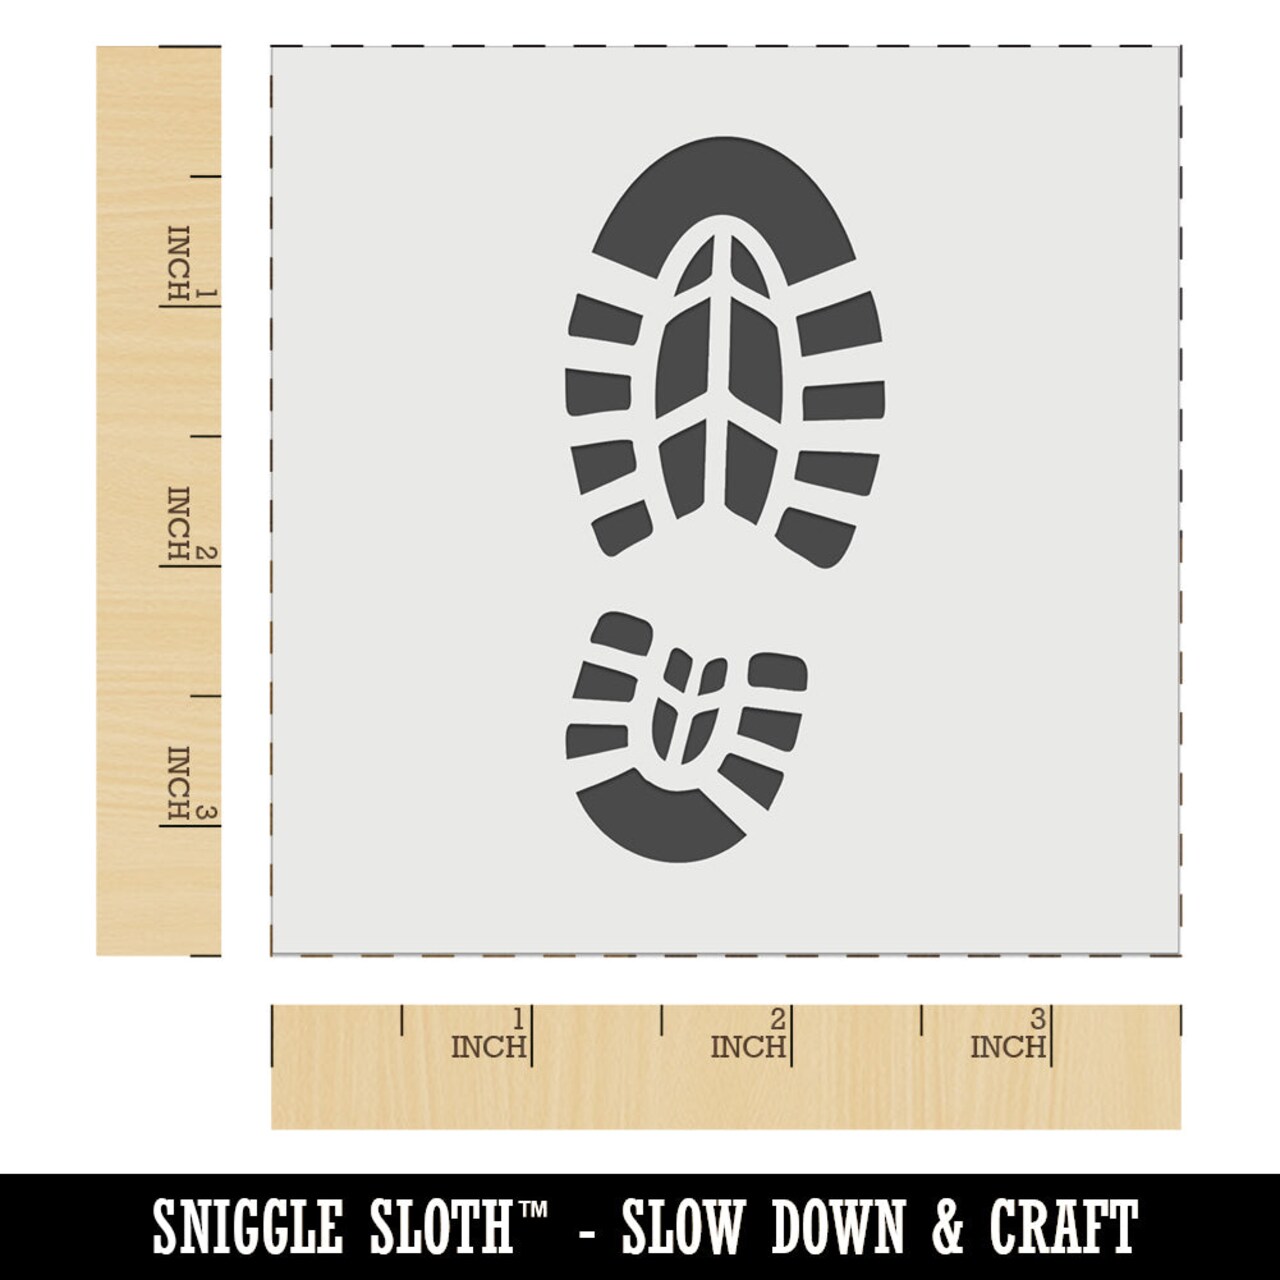 Shoe Print Boot Wall Cookie DIY Craft Reusable Stencil